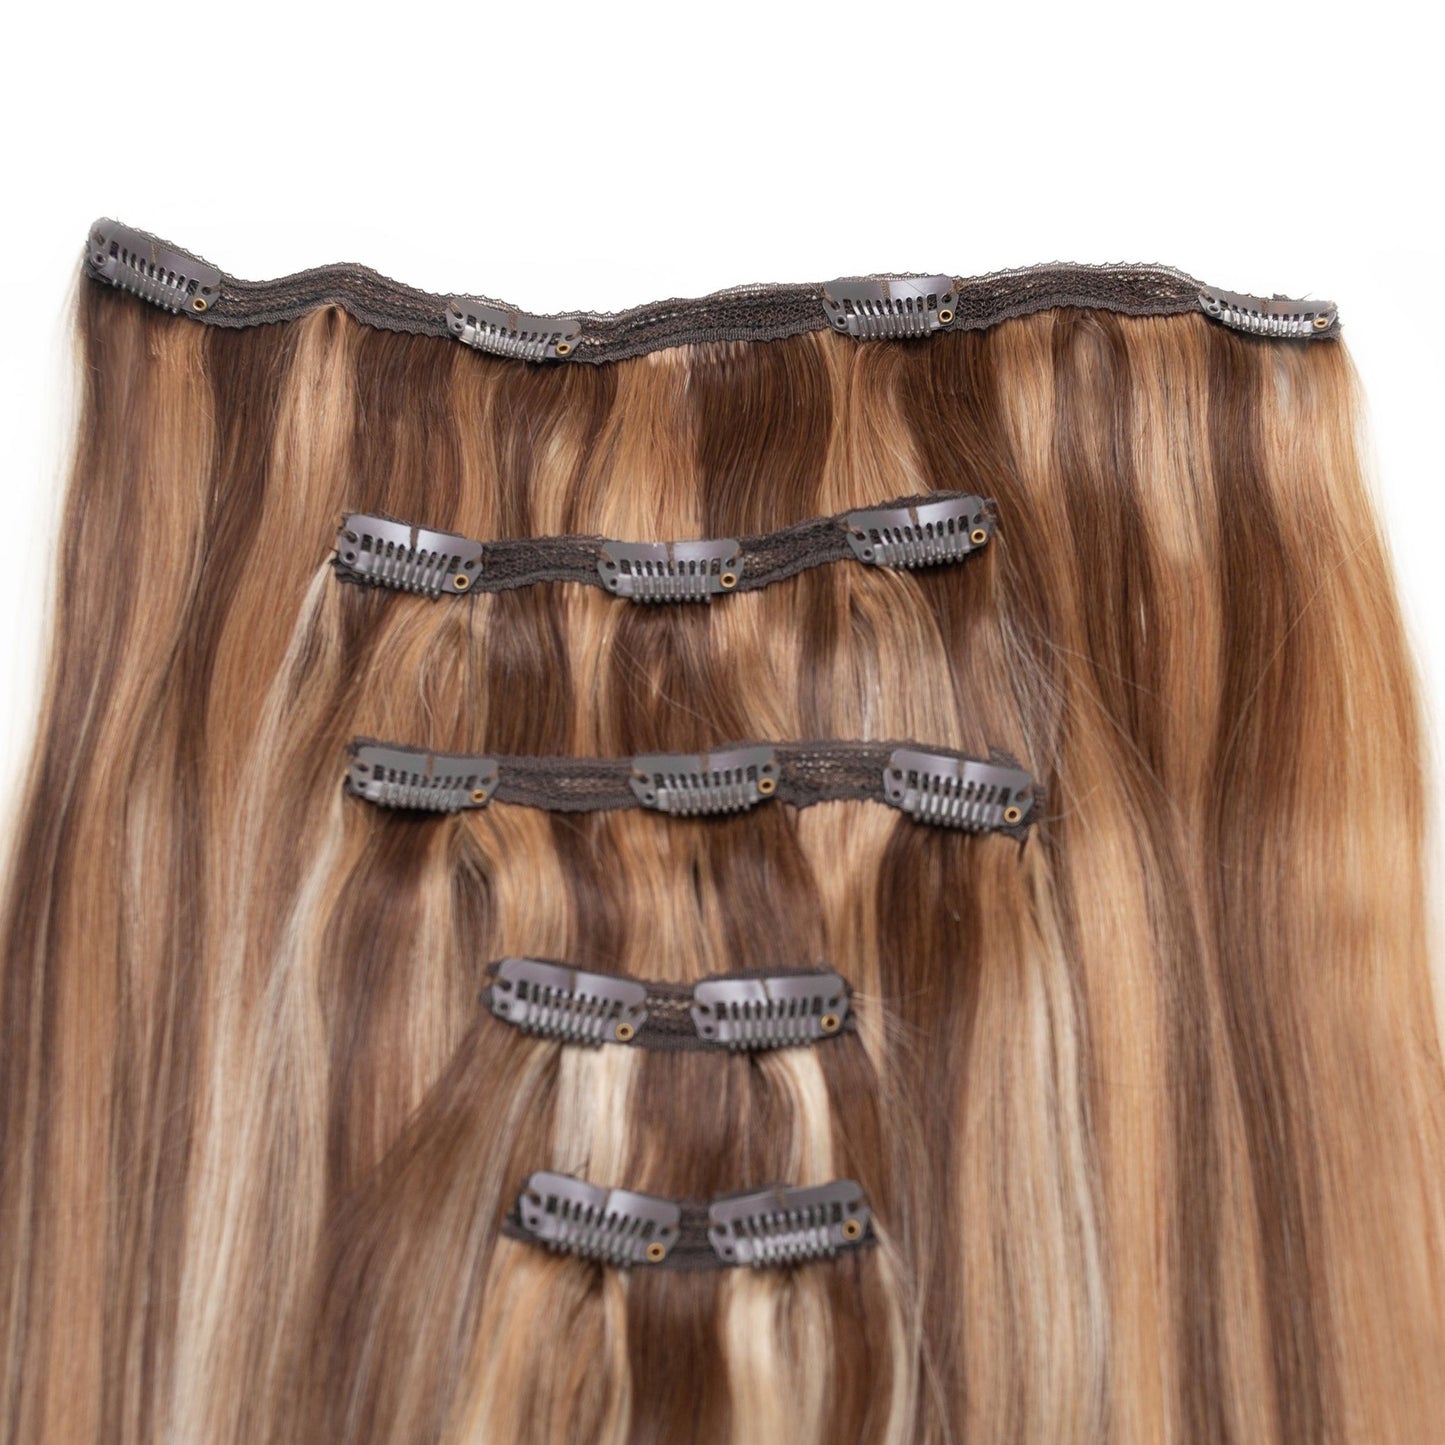 Seamless1 Ritzy Blend Piano Colour Human Hair in 5 Piece - shelley and co